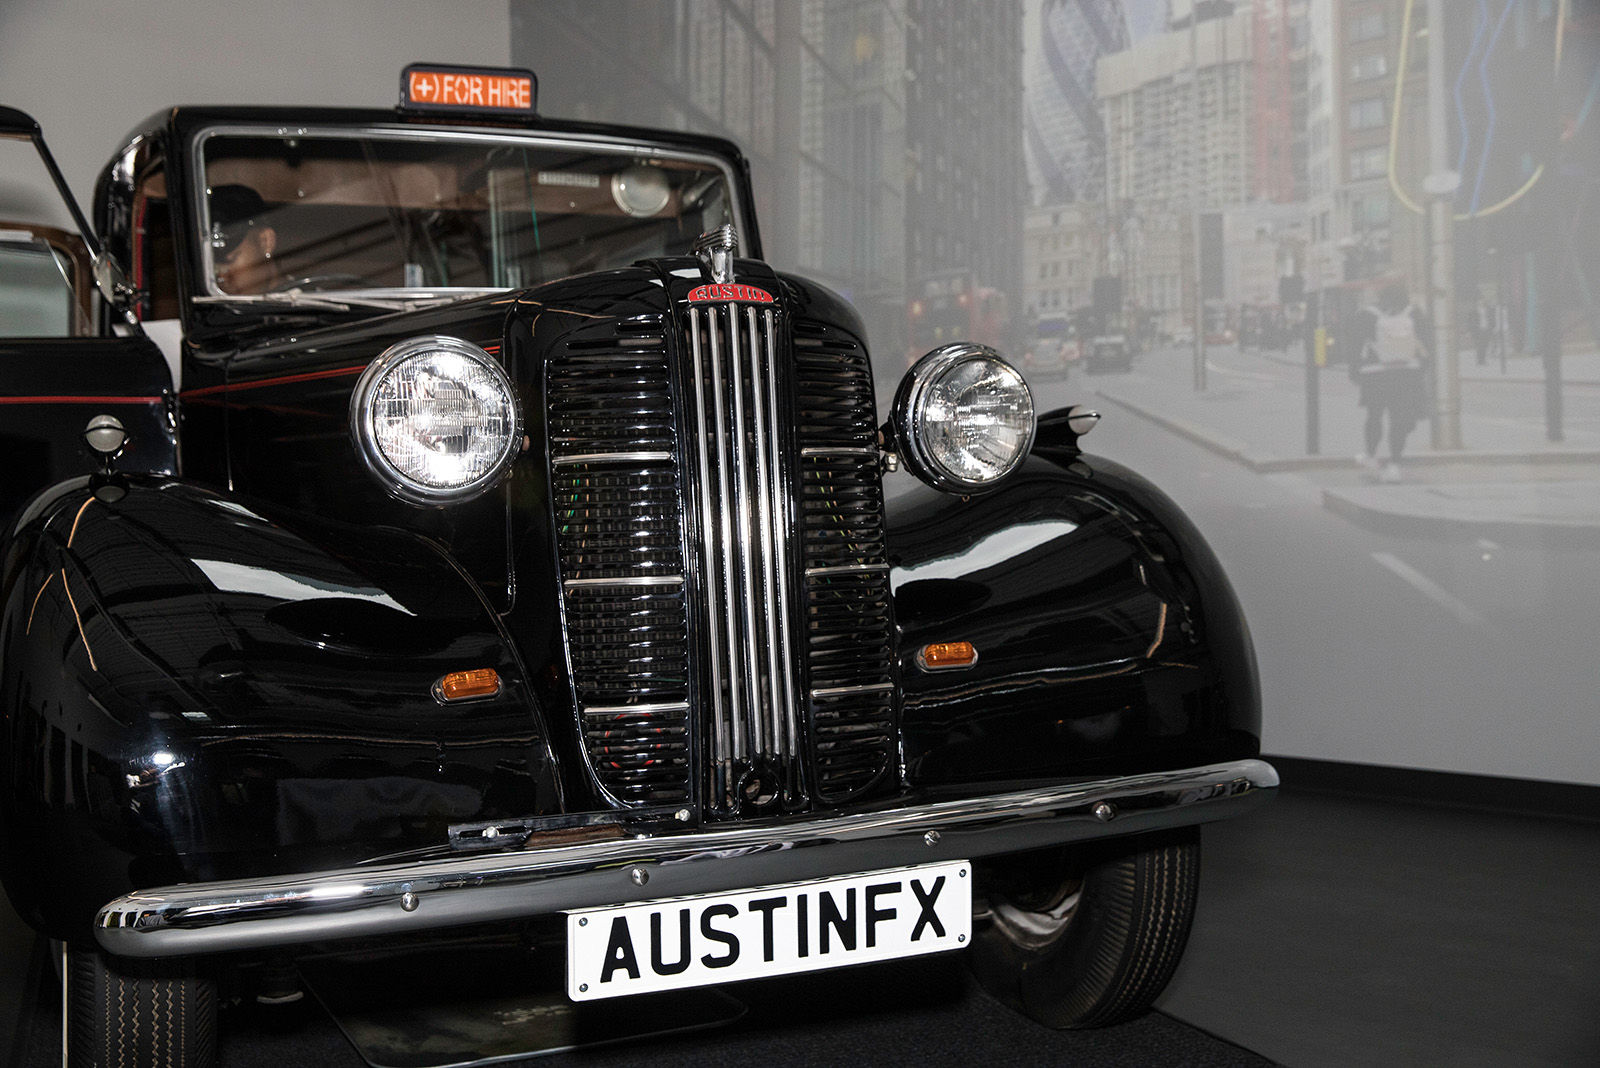 An antique London taxi cab inside the offices of (add)ventures.